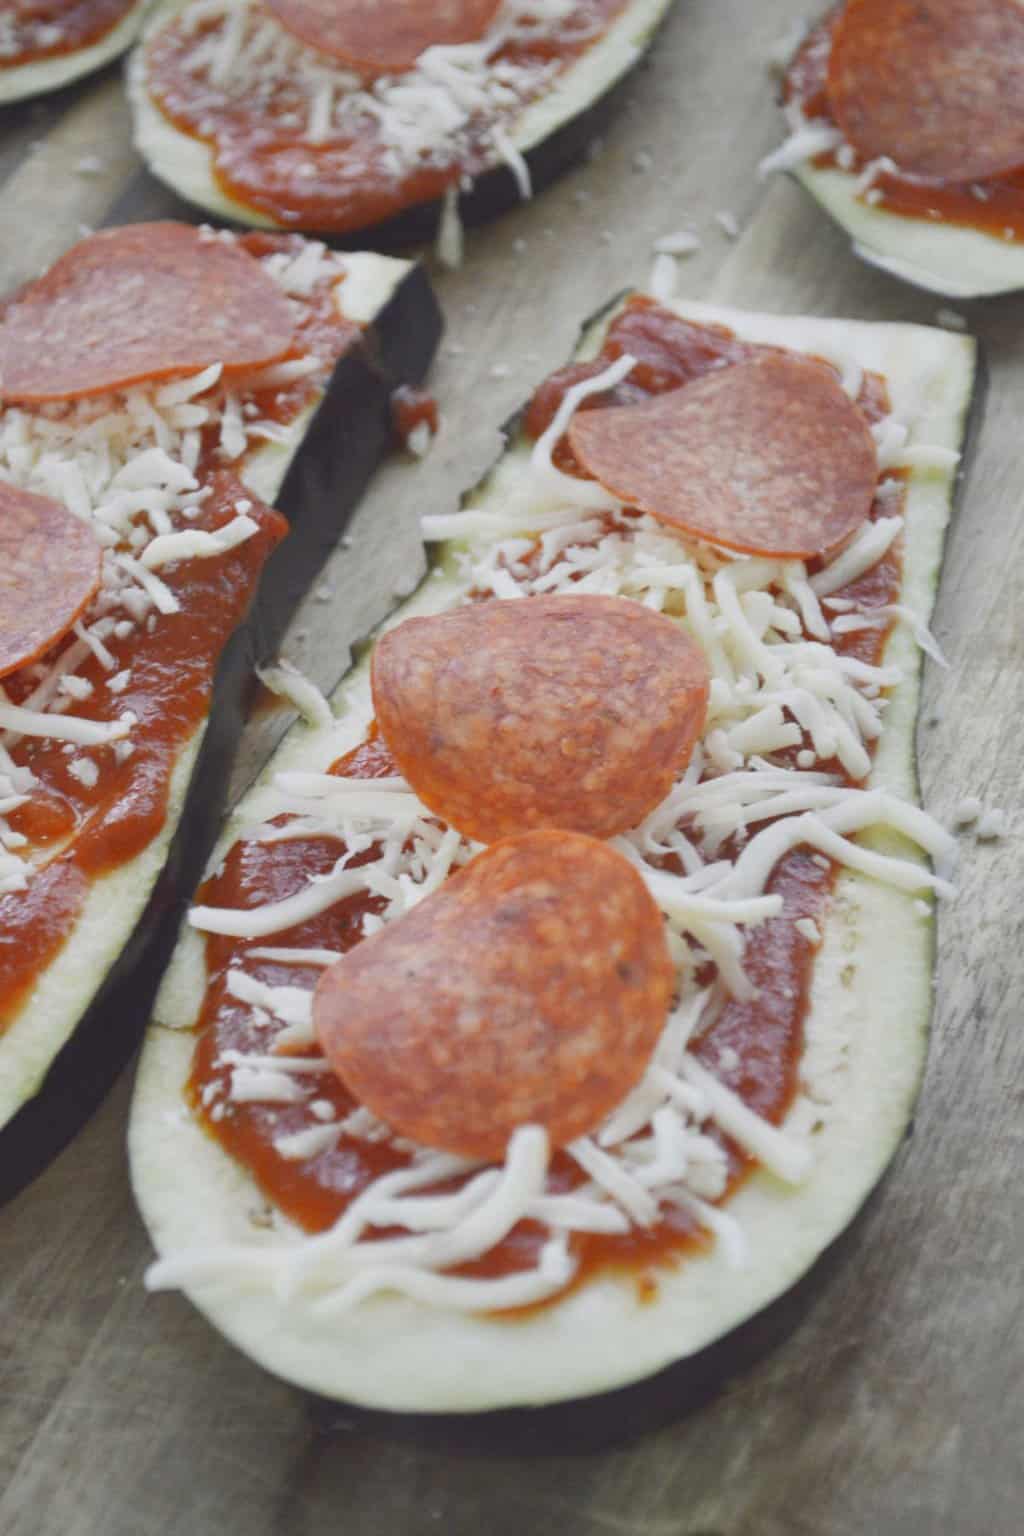 Pepperoni and cheese added on eggplant.